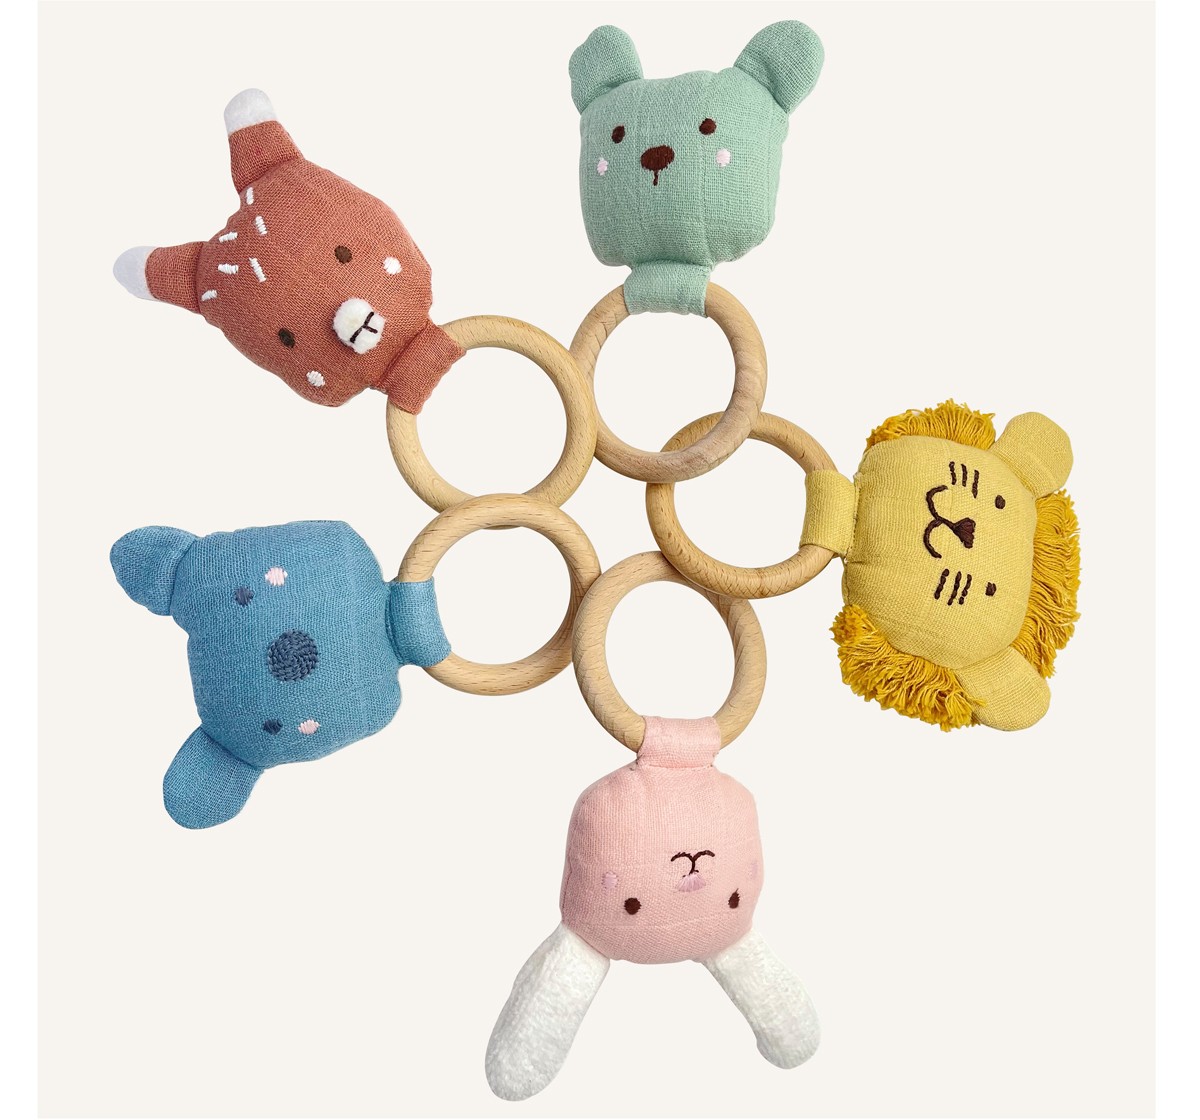 Abracadabra Organics Collectible Teether, Sensory Exploration and Teething Relief with Easy to Hold Handles, 0Y+ Yellow